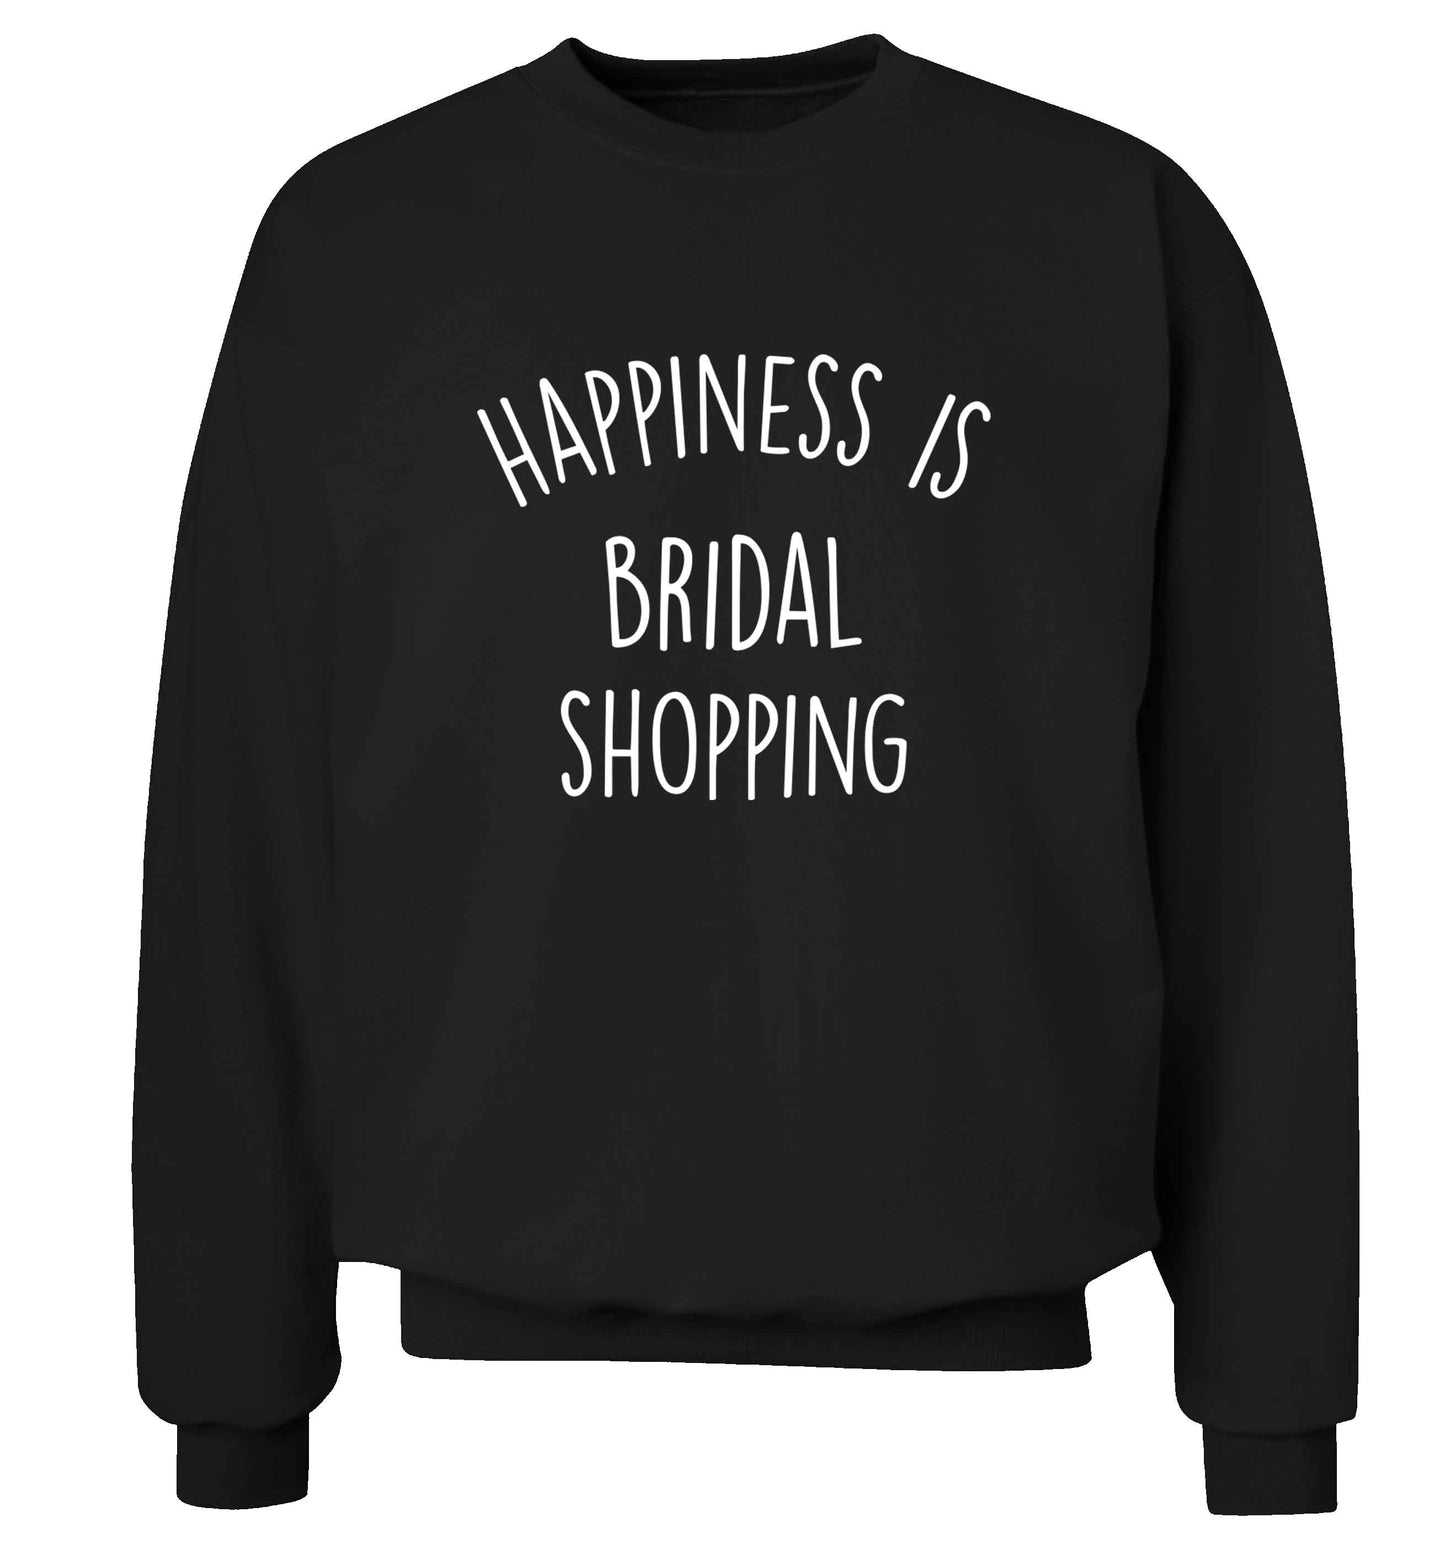 Happiness is bridal shopping adult's unisex black sweater 2XL